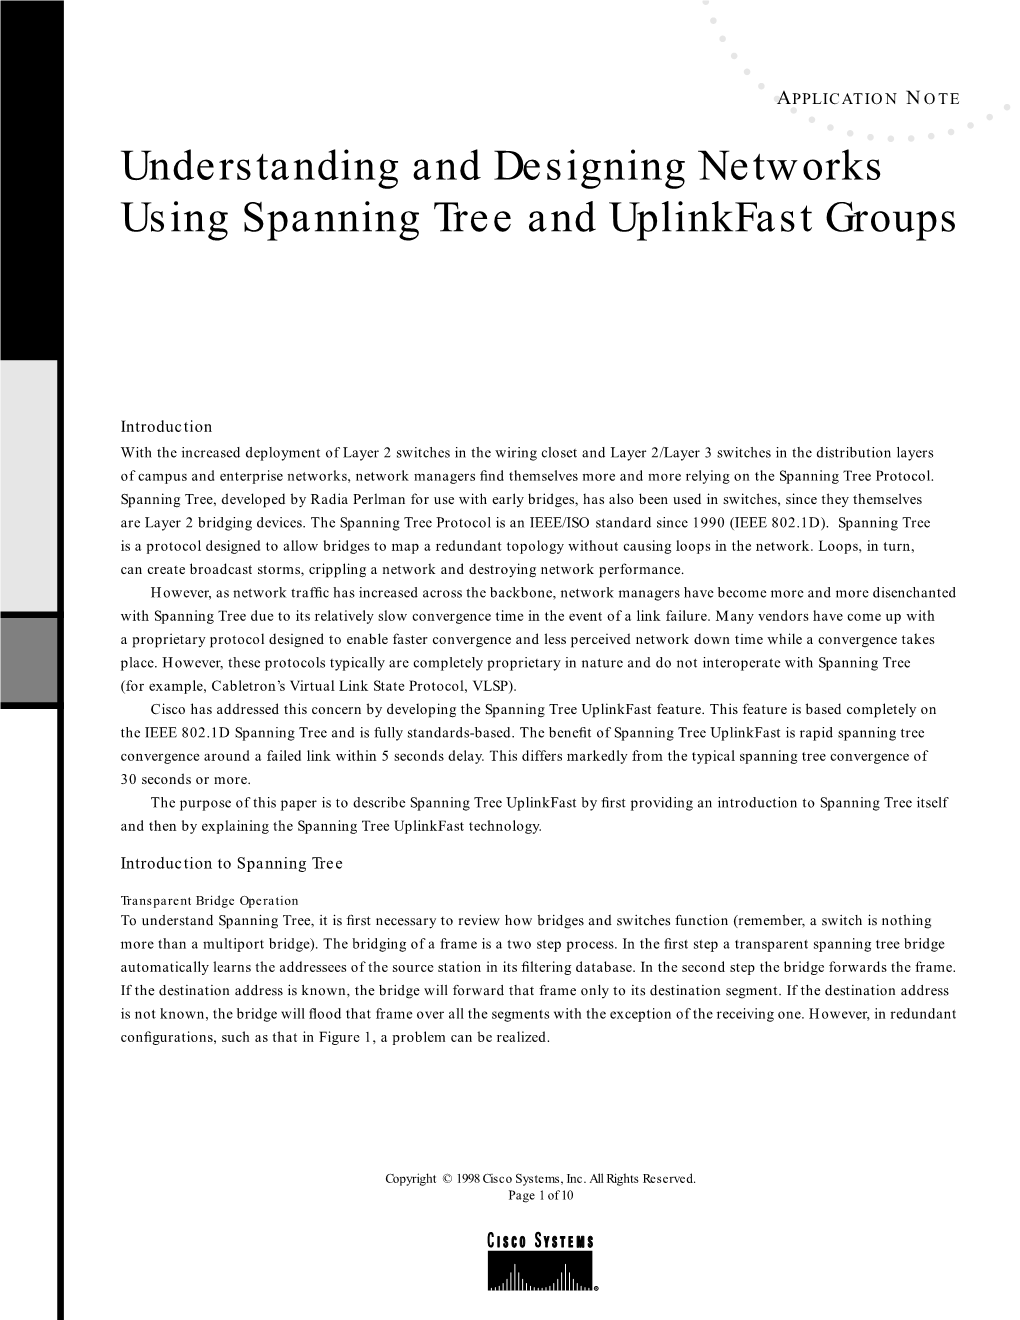 Understanding and Designing Networks Using Spanning Tree and Uplinkfast Groups